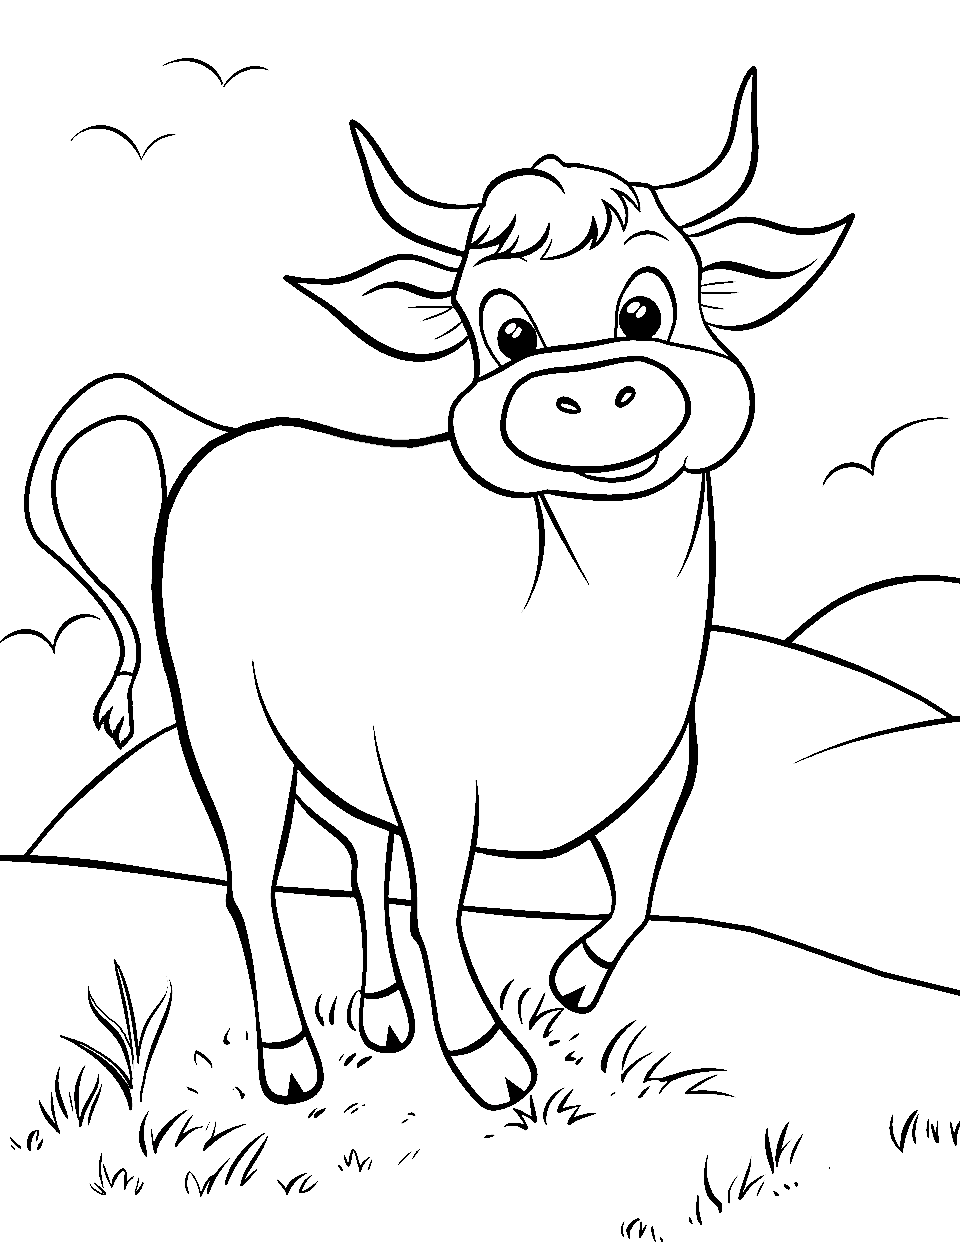 Dancing in the Field Coloring Page - A jolly cow twisting and twirling among gentle grassy knolls.